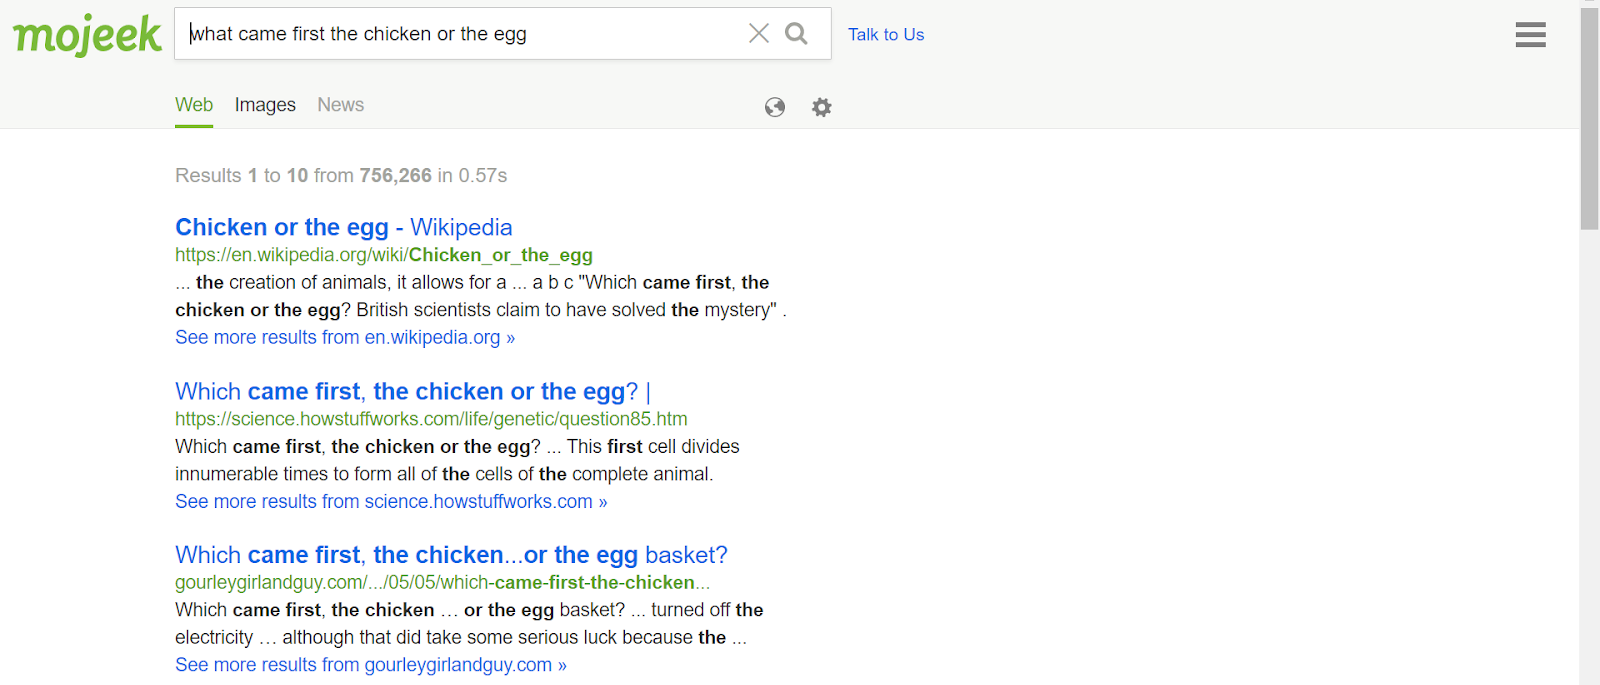 Mojeek screenshot showing top results for “What came first the chicken or the egg”.